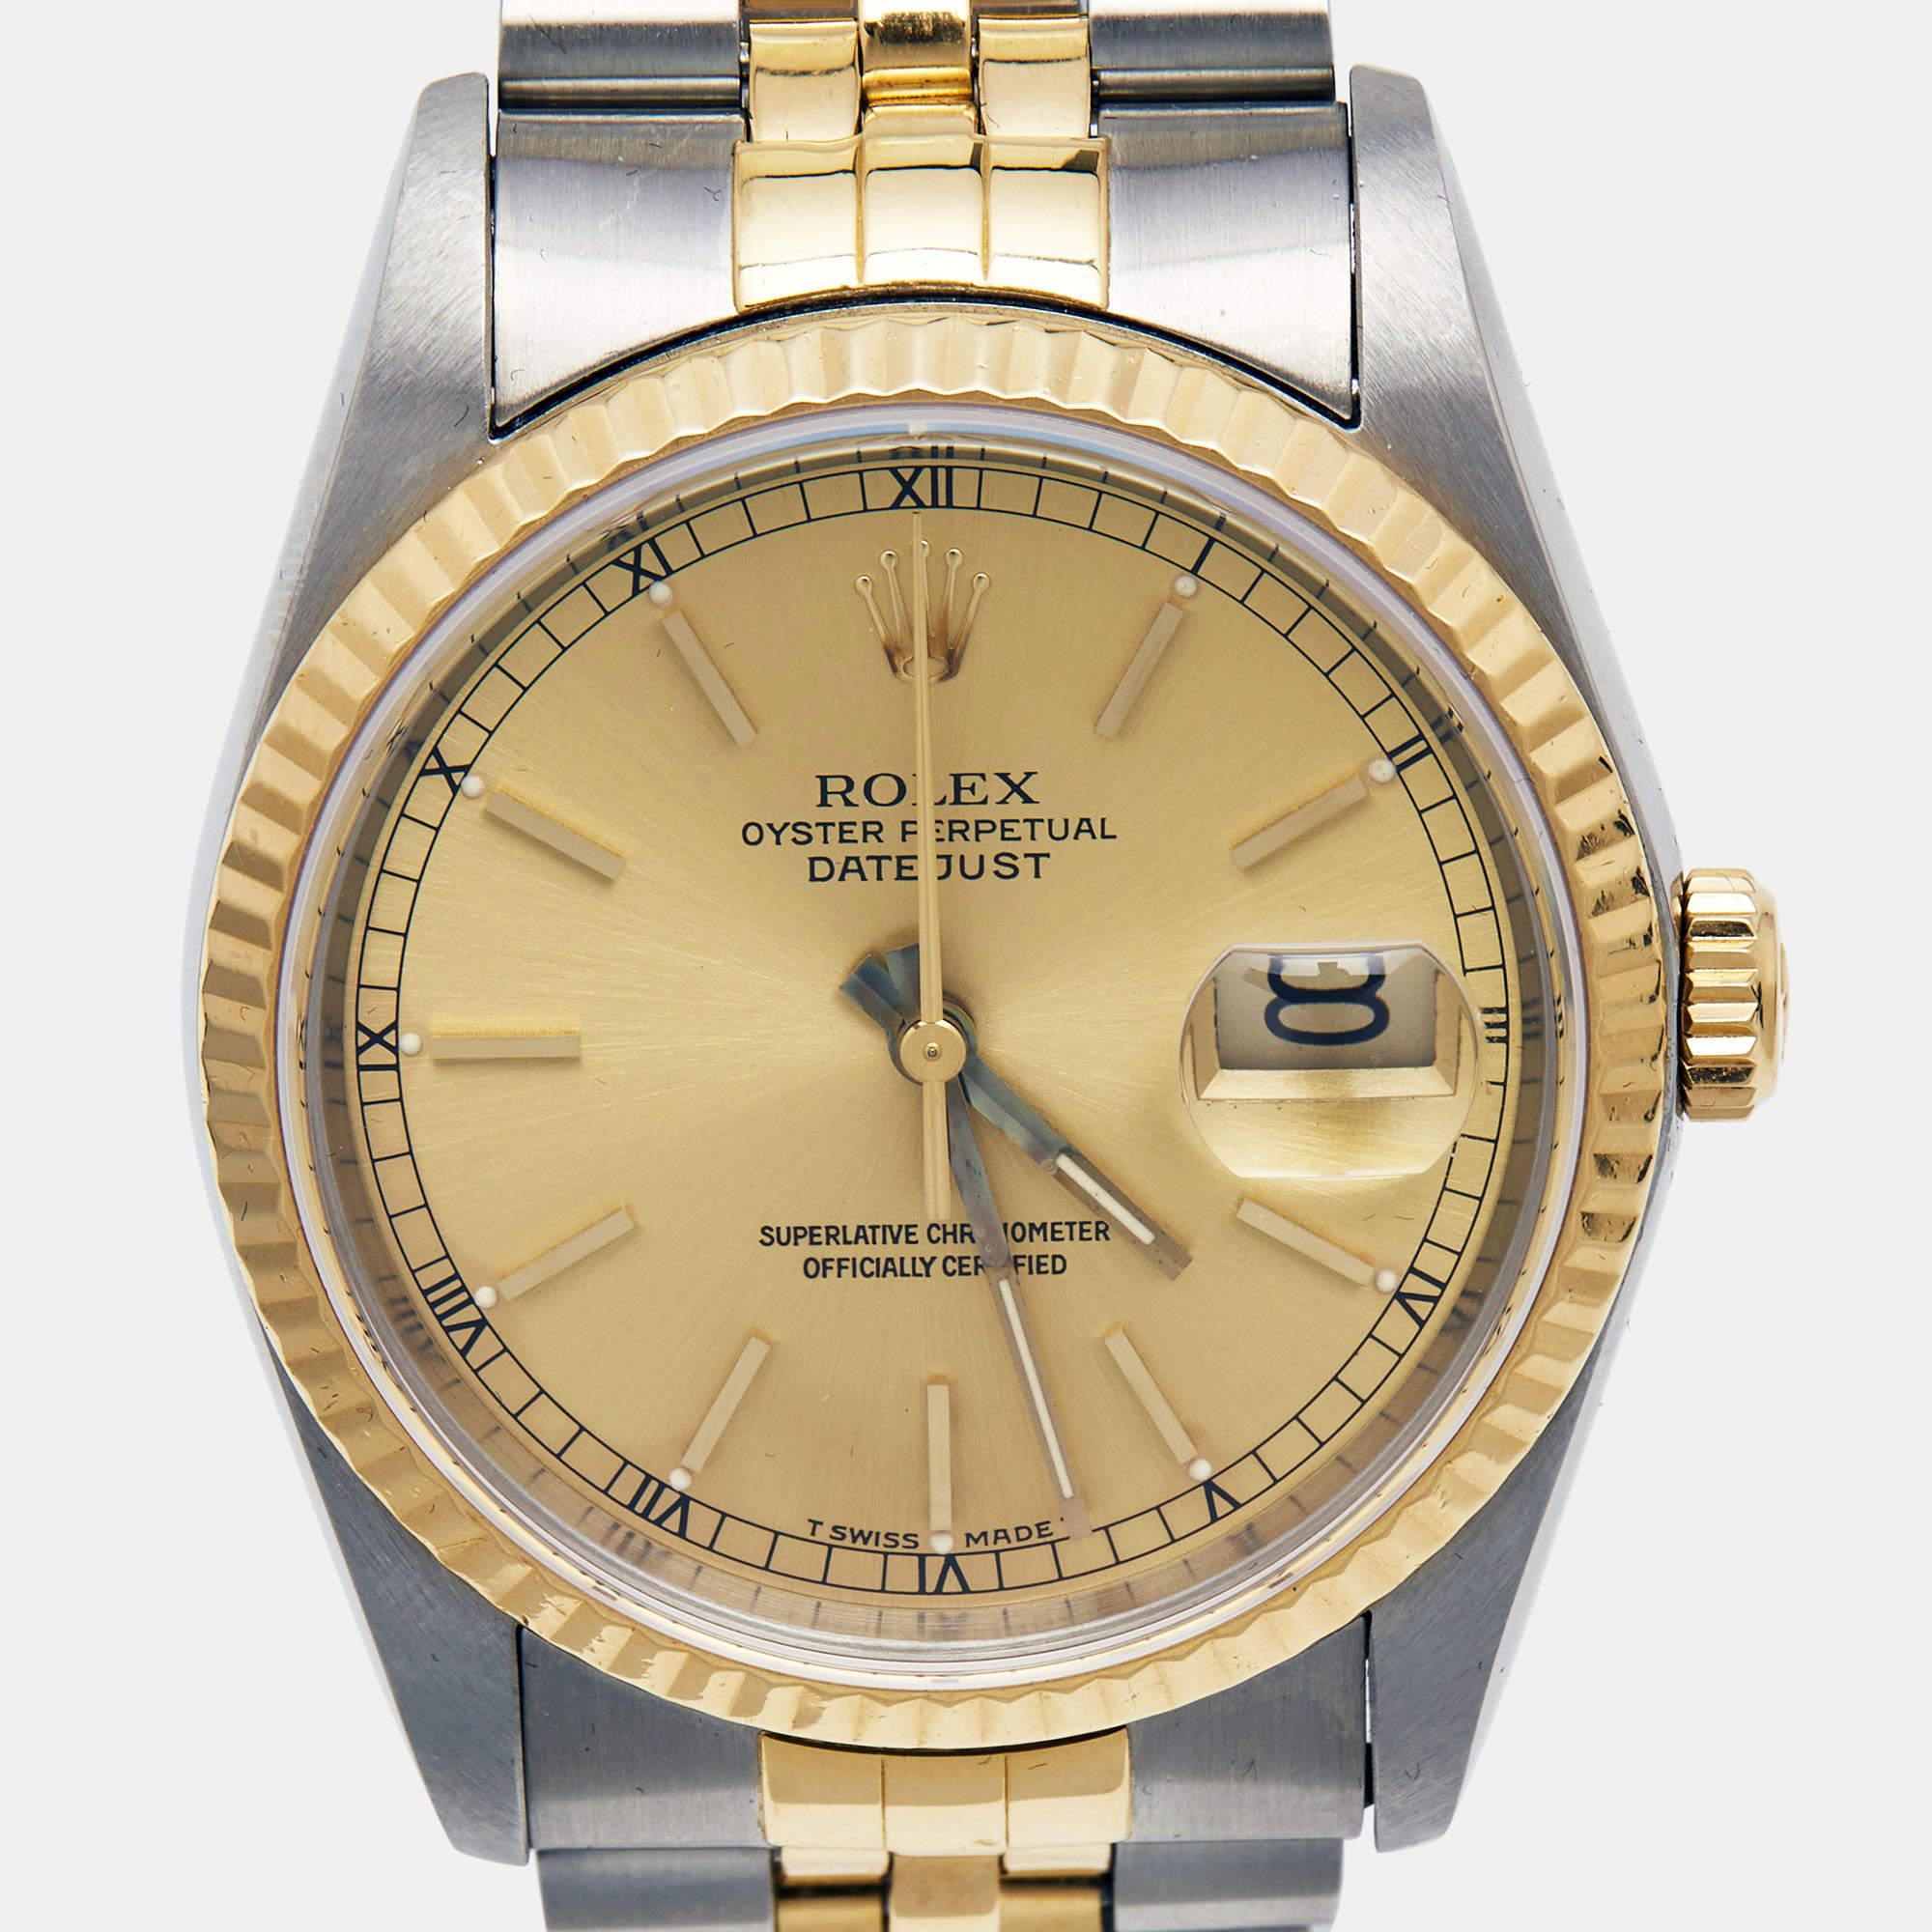 The Datejust is one of the most recognized and coveted watches from the house of Rolex. It has a distinct look and an irrefutable appeal. Crafted in stainless steel and 18k yellow gold, this vintage Rolex Datejust wristwatch has the signature